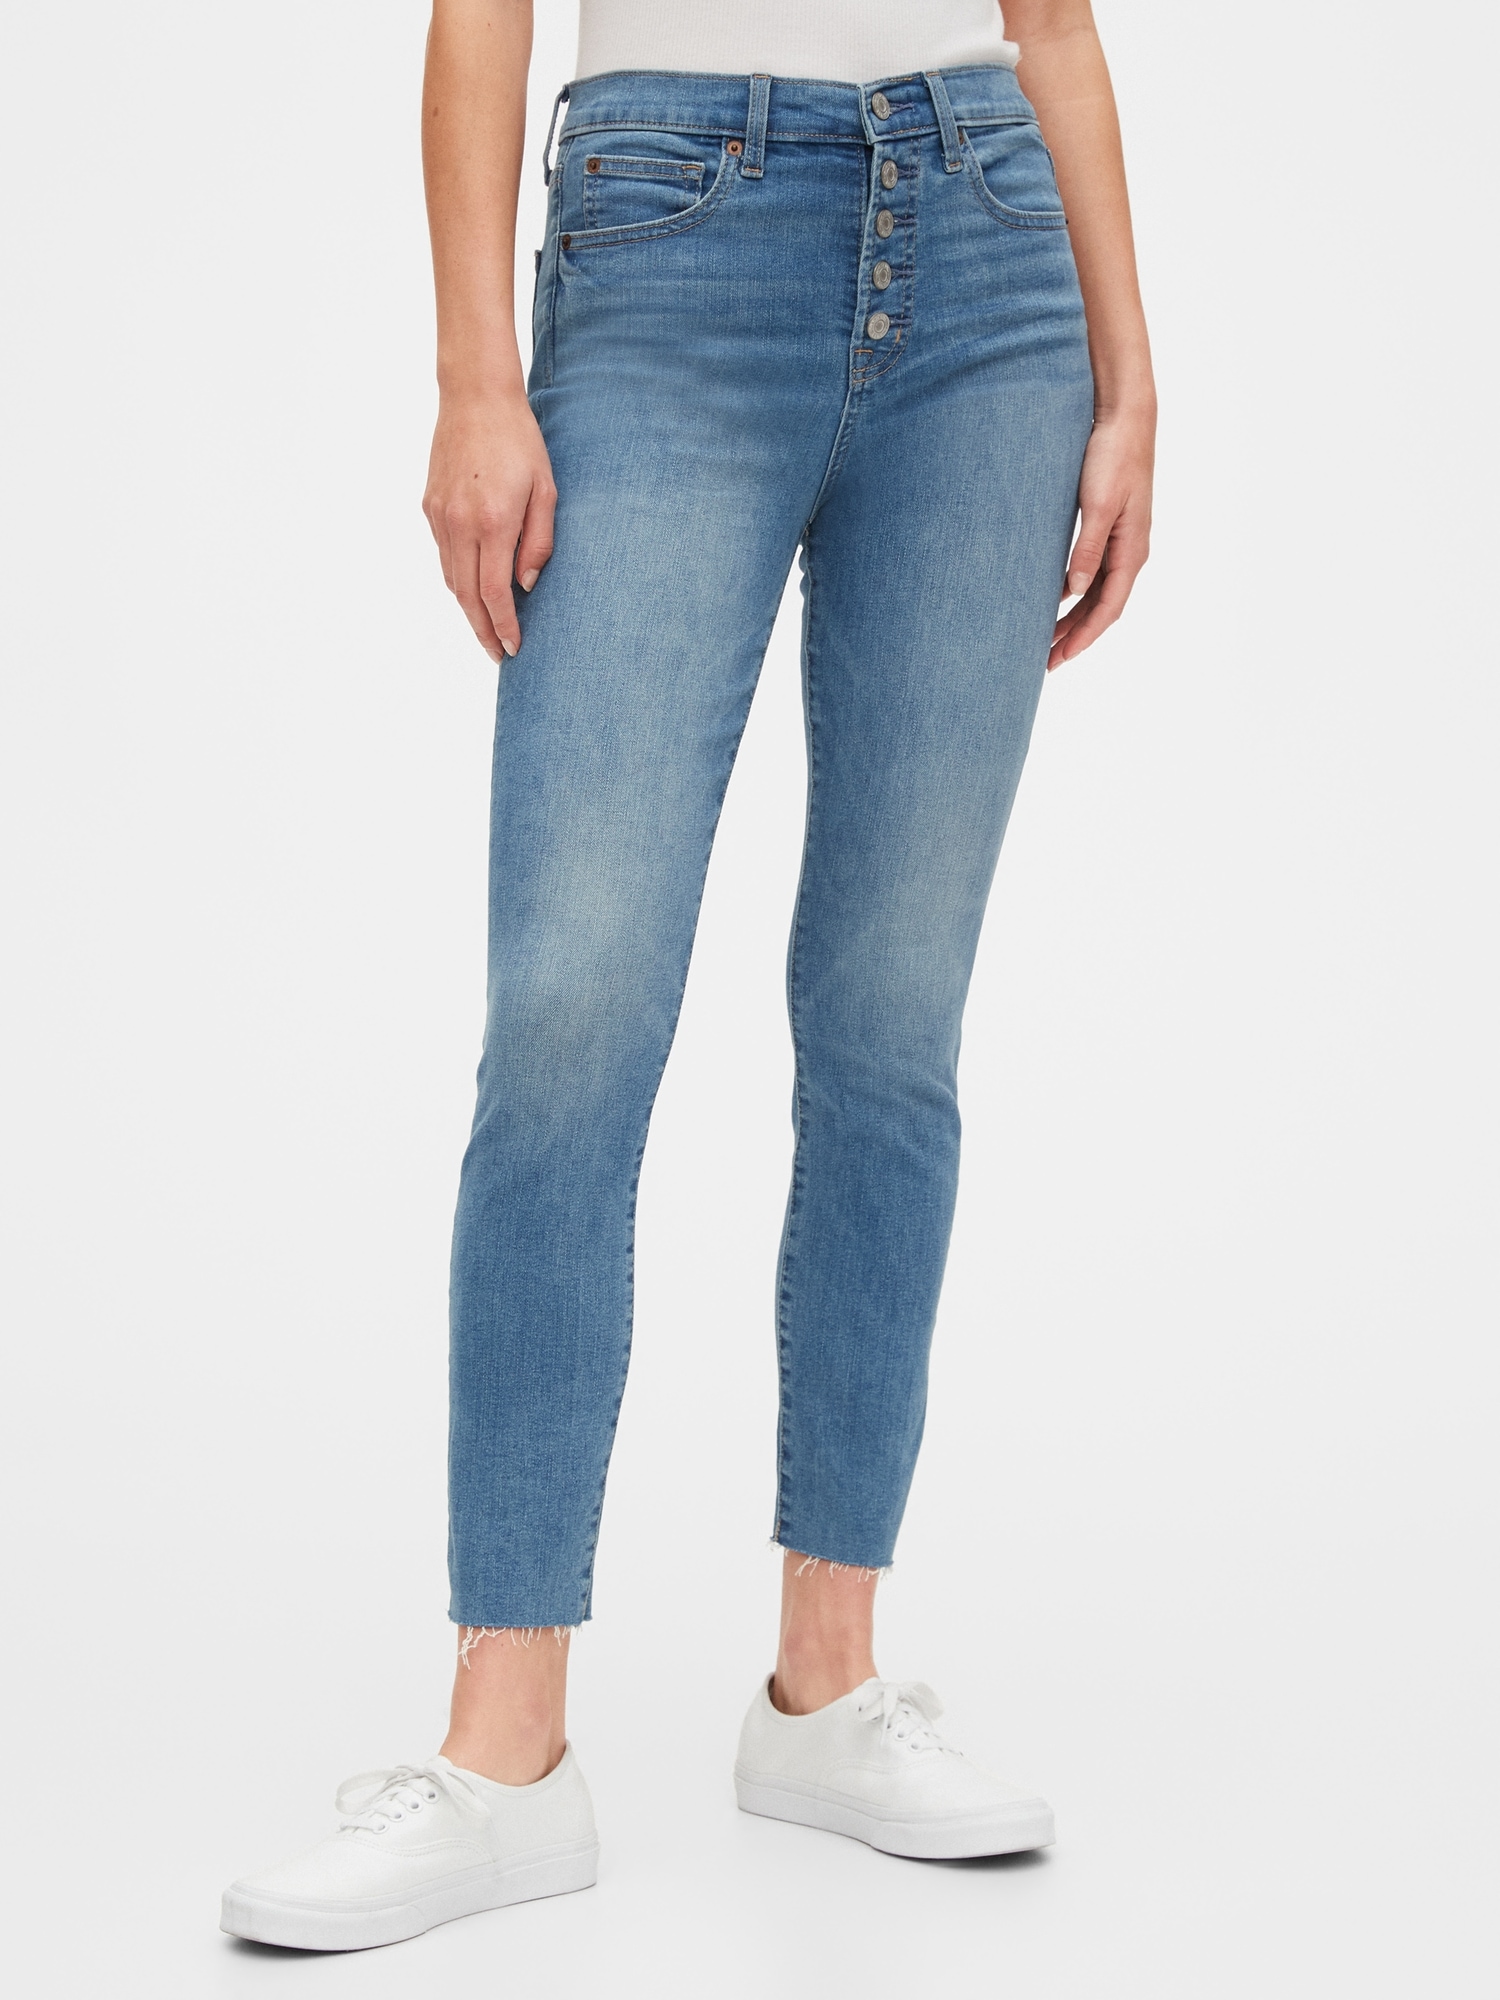 gap ankle jeans